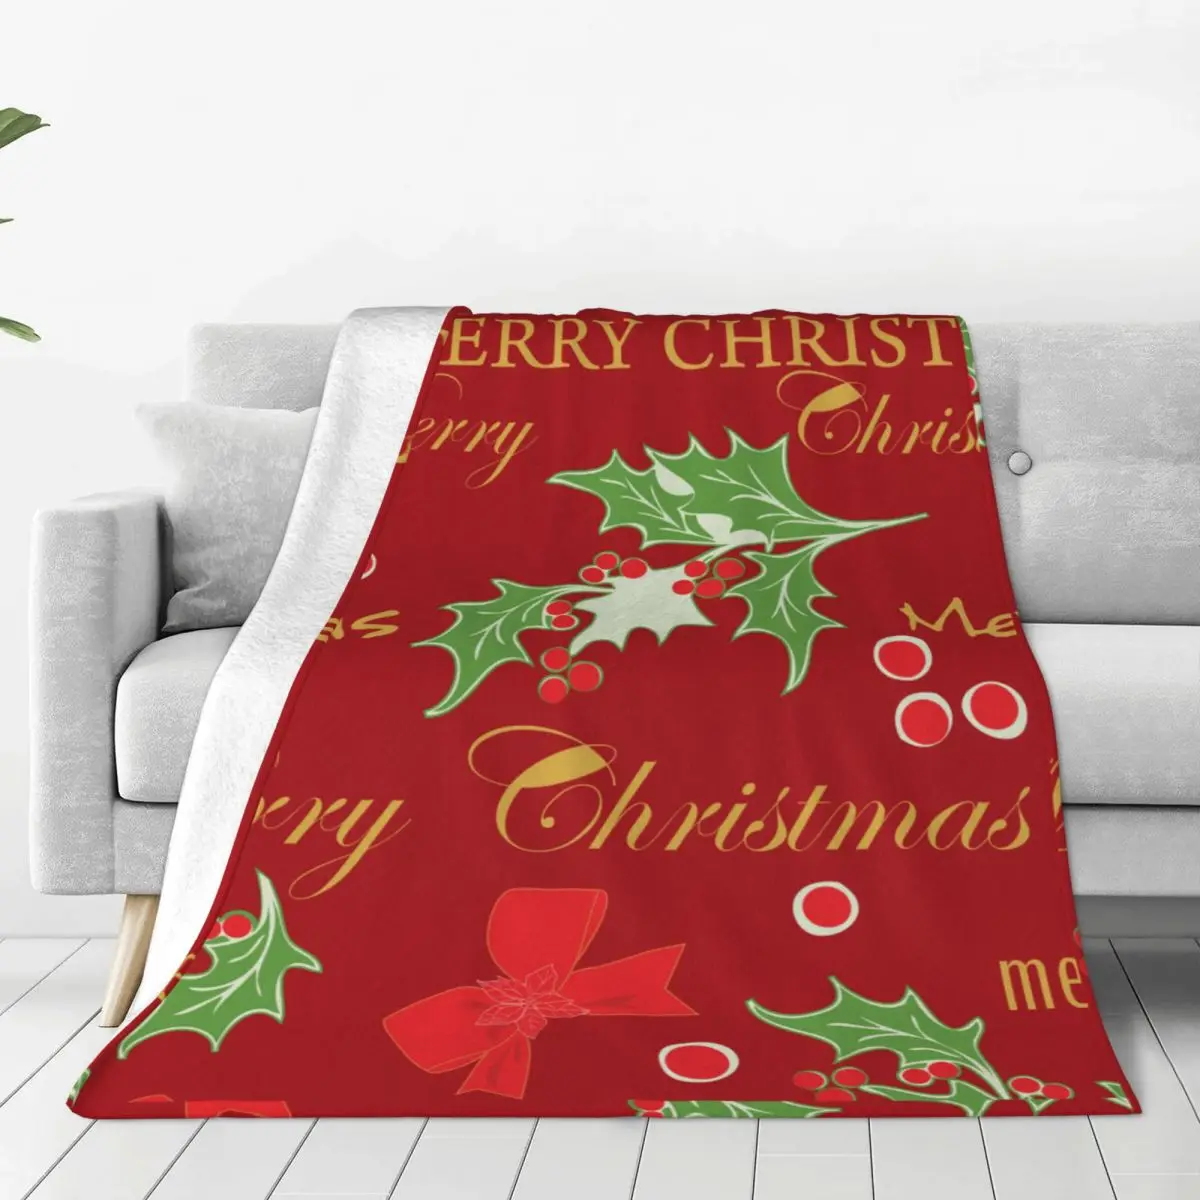 

Merry Christmas Soft Fleece Throw Blanket Warm and Cozy for All Seasons Comfy Microfiber Blanket for Couch Sofa Bed 40"x30"